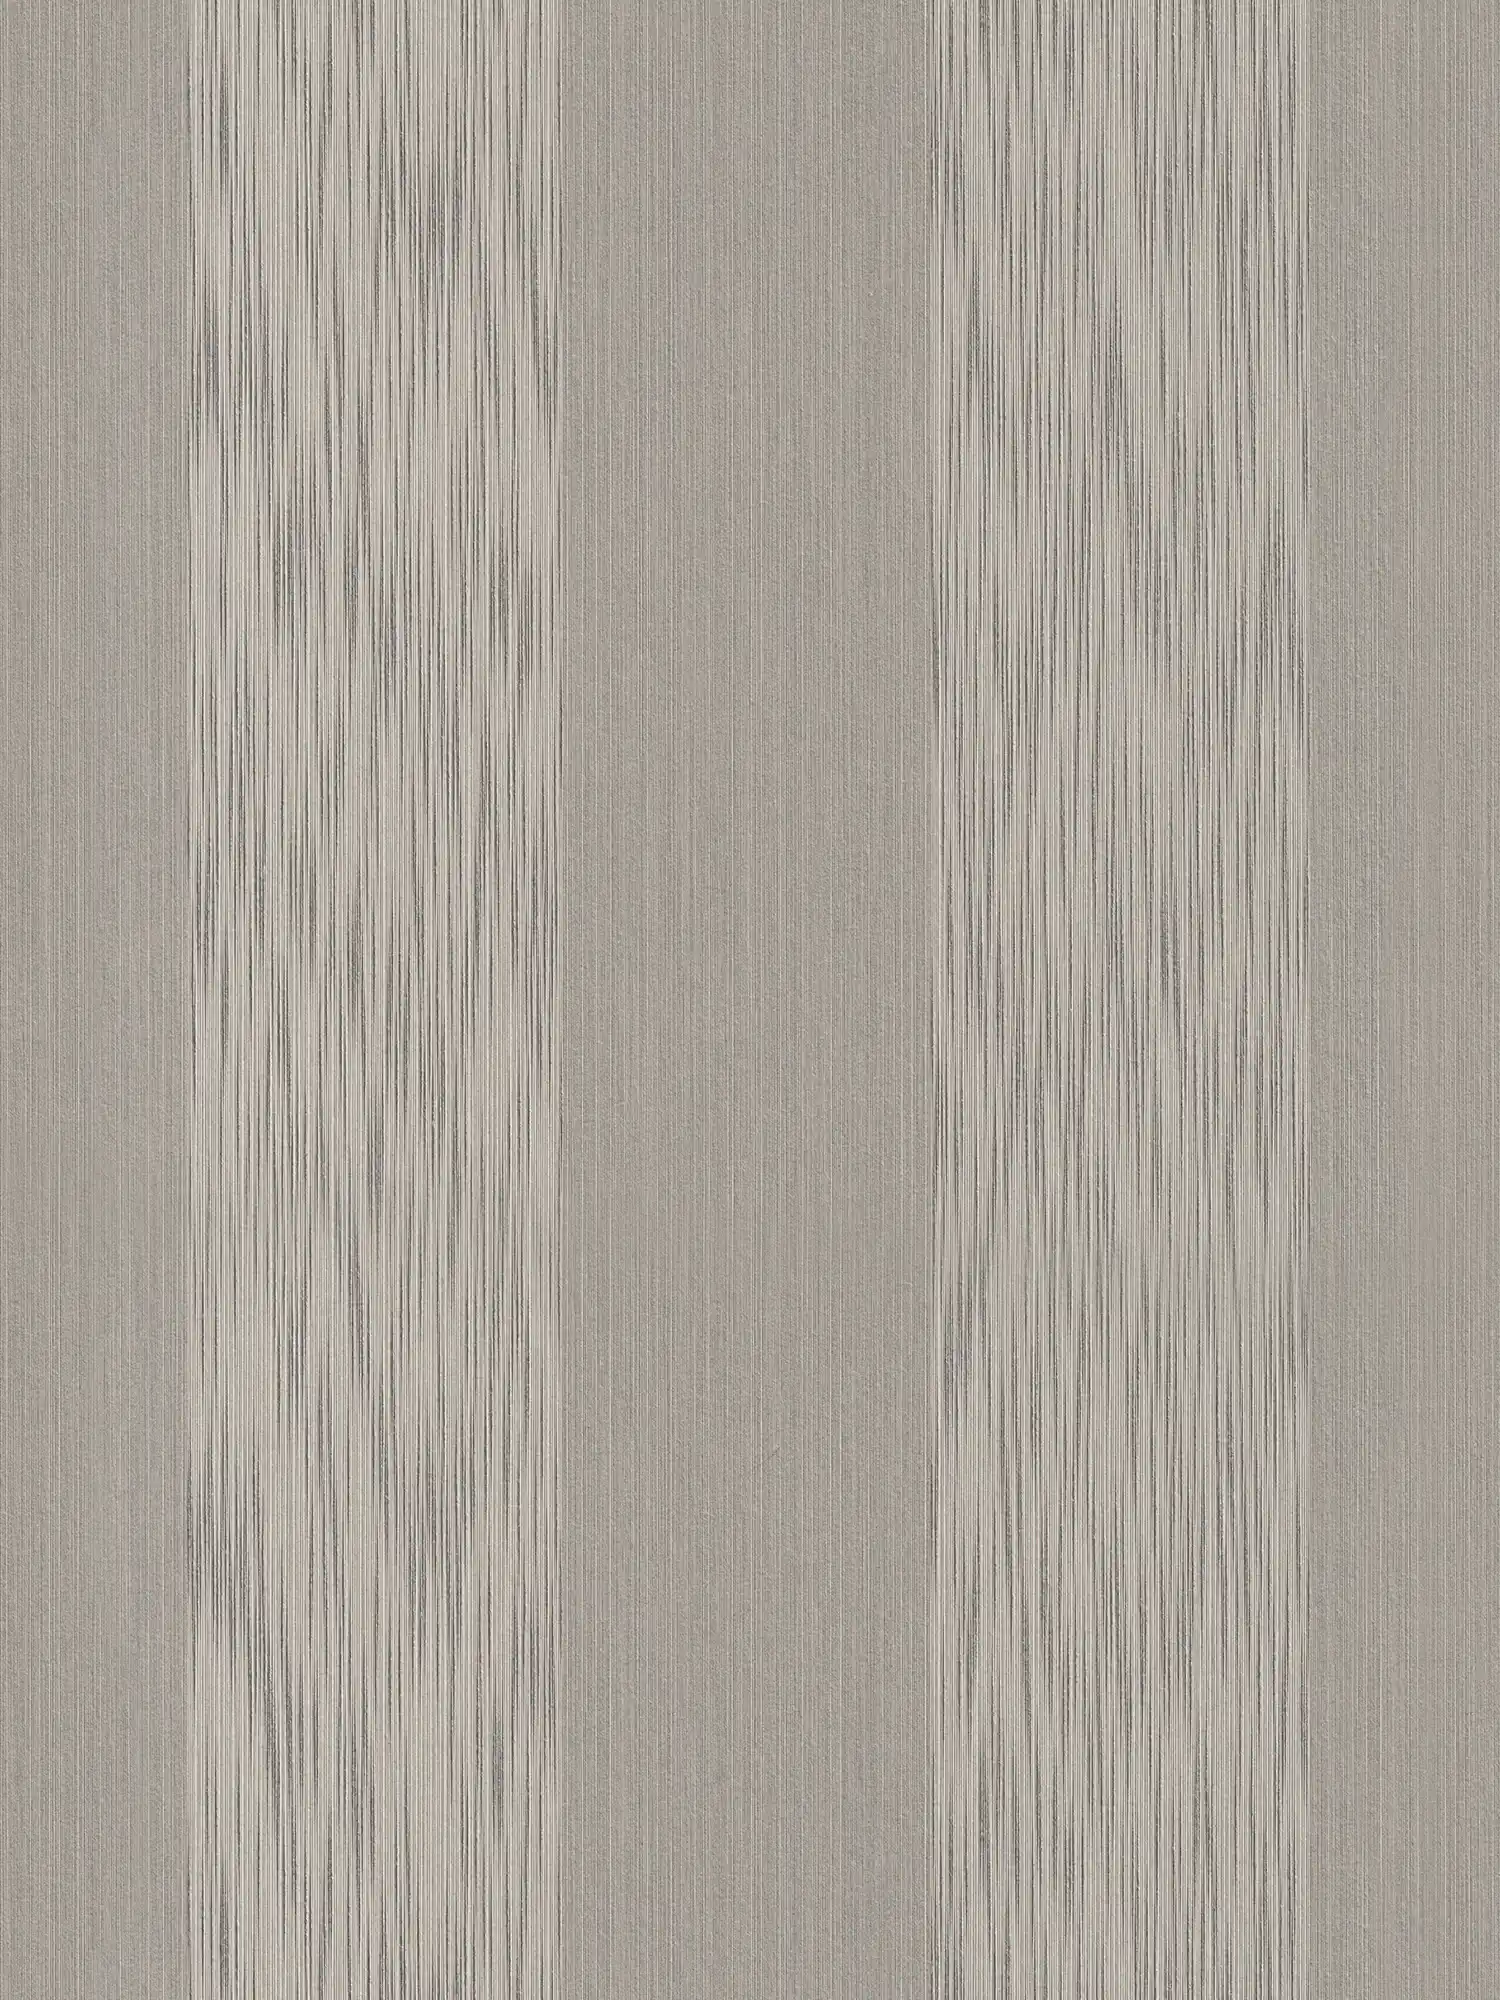 Melange stripes wallpaper with texture effect - grey
